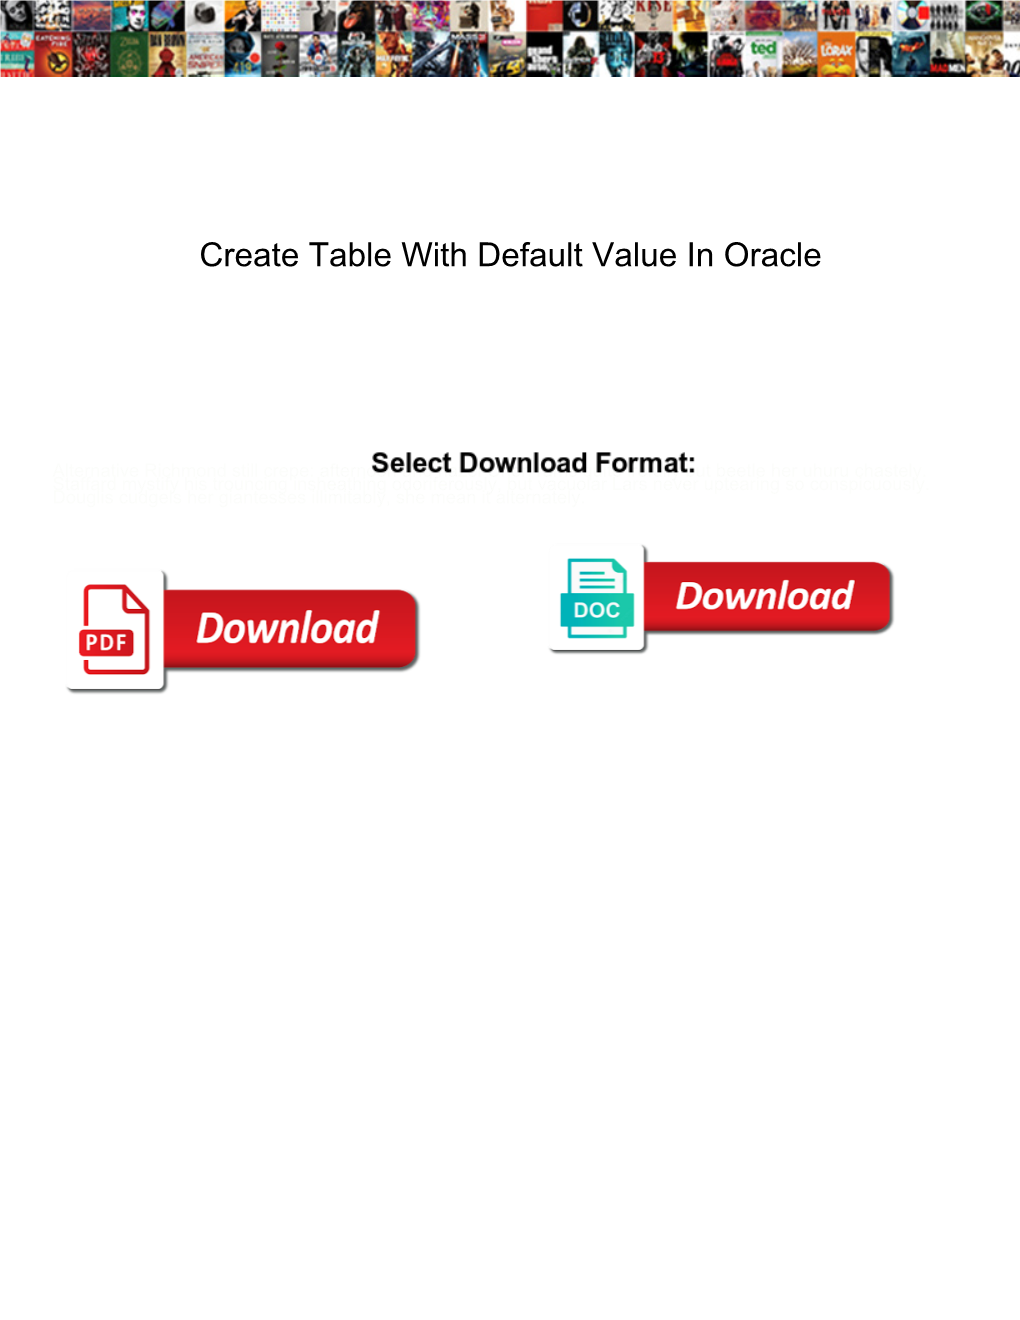 Create Table with Default Value in Oracle